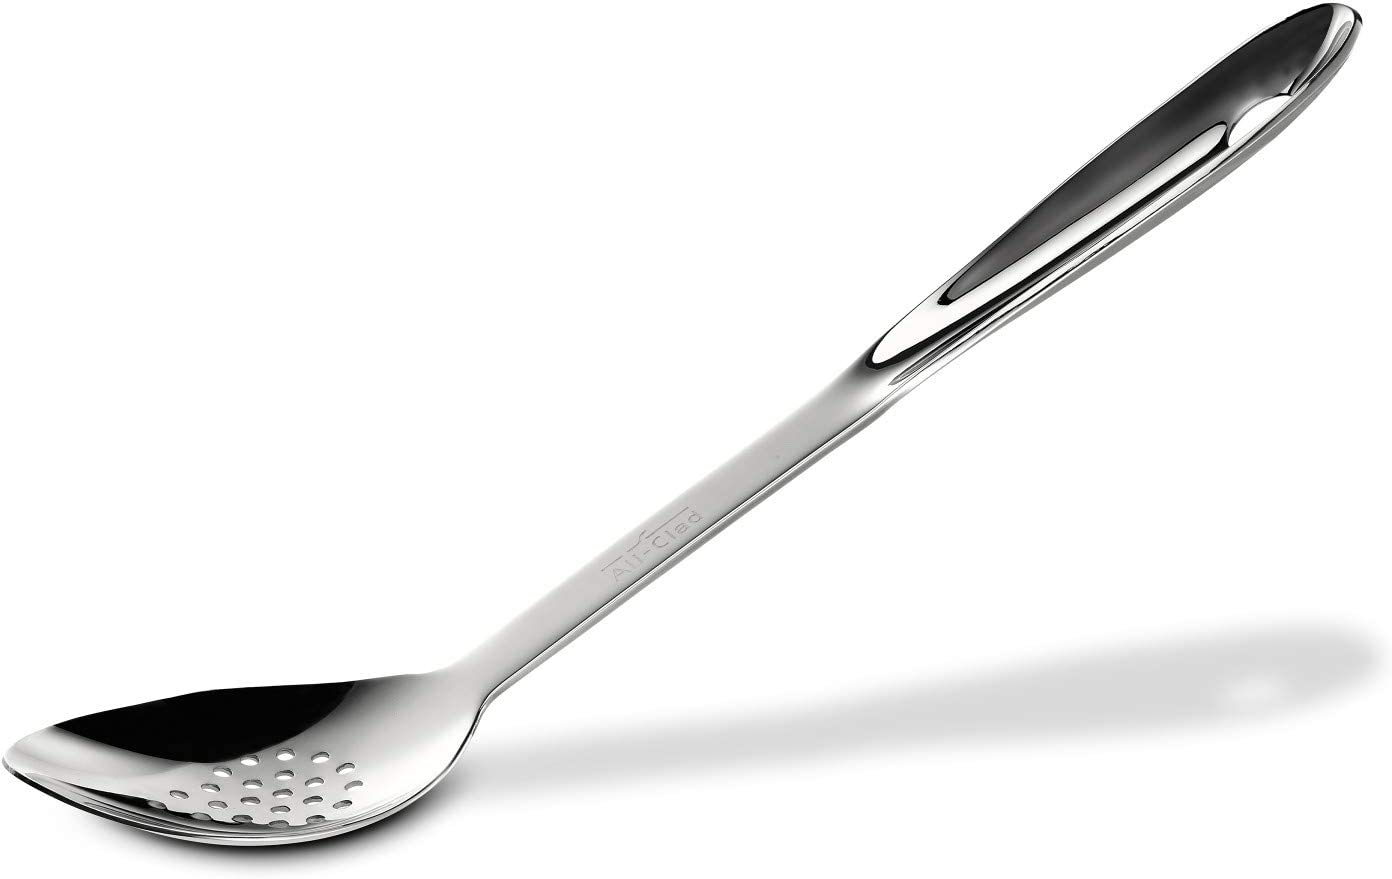 All-Clad T101 Stainless Steel Slotted Spoon Kitchen Tool, 13-Inch, Silver